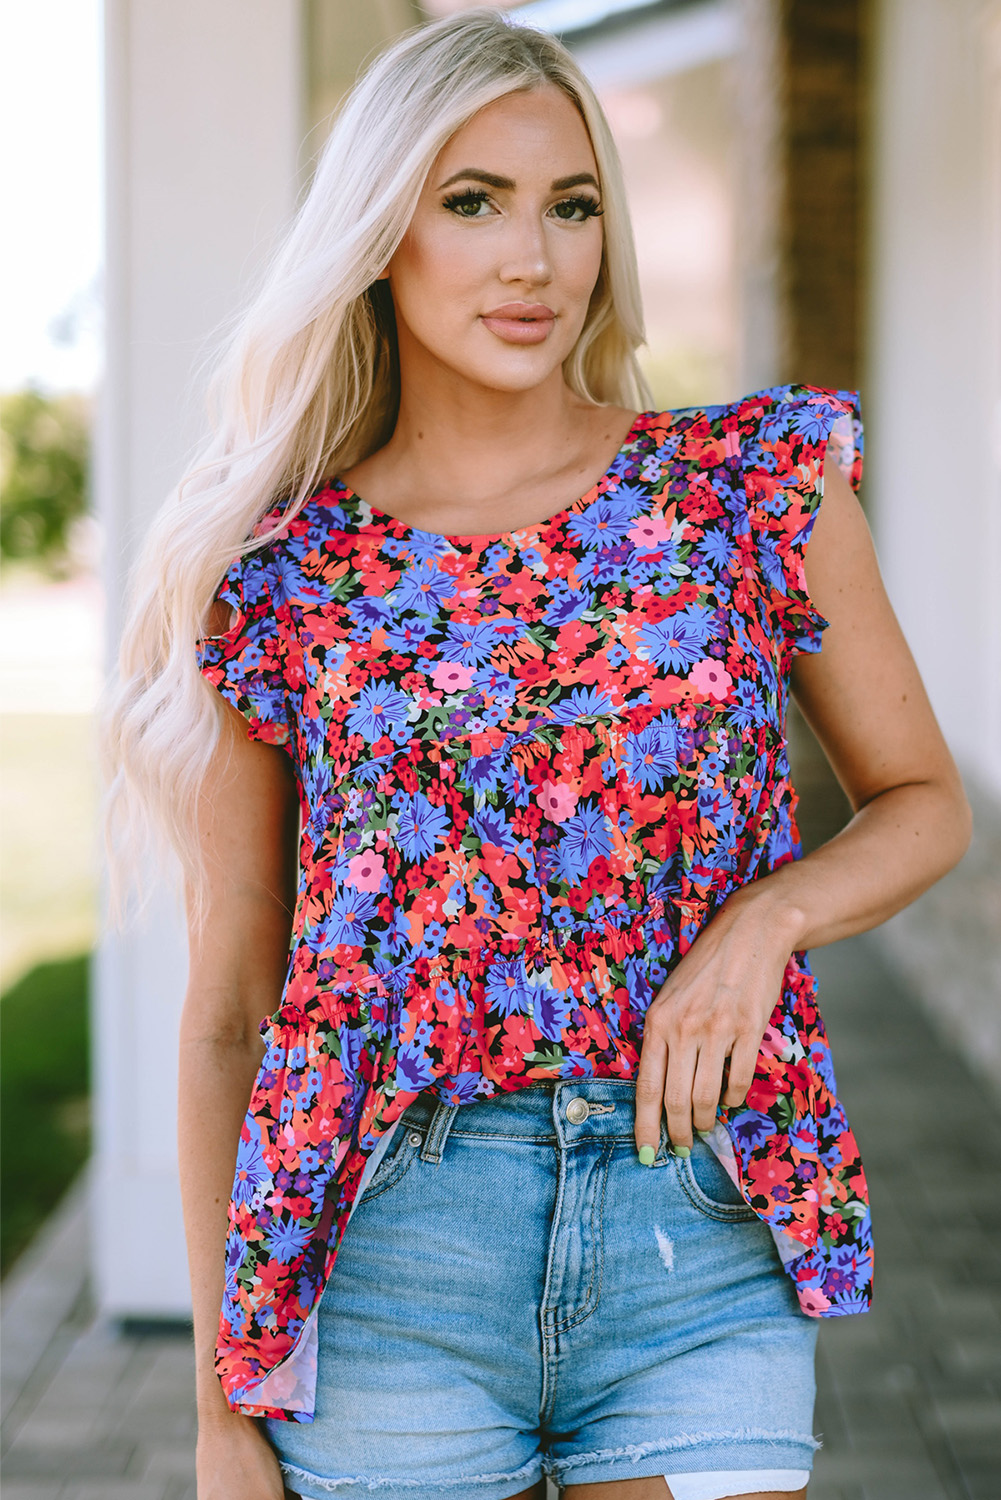 $6.98 Multicolor Floral Print Ruffle Tiered Short Sleeve Babydoll Top ...